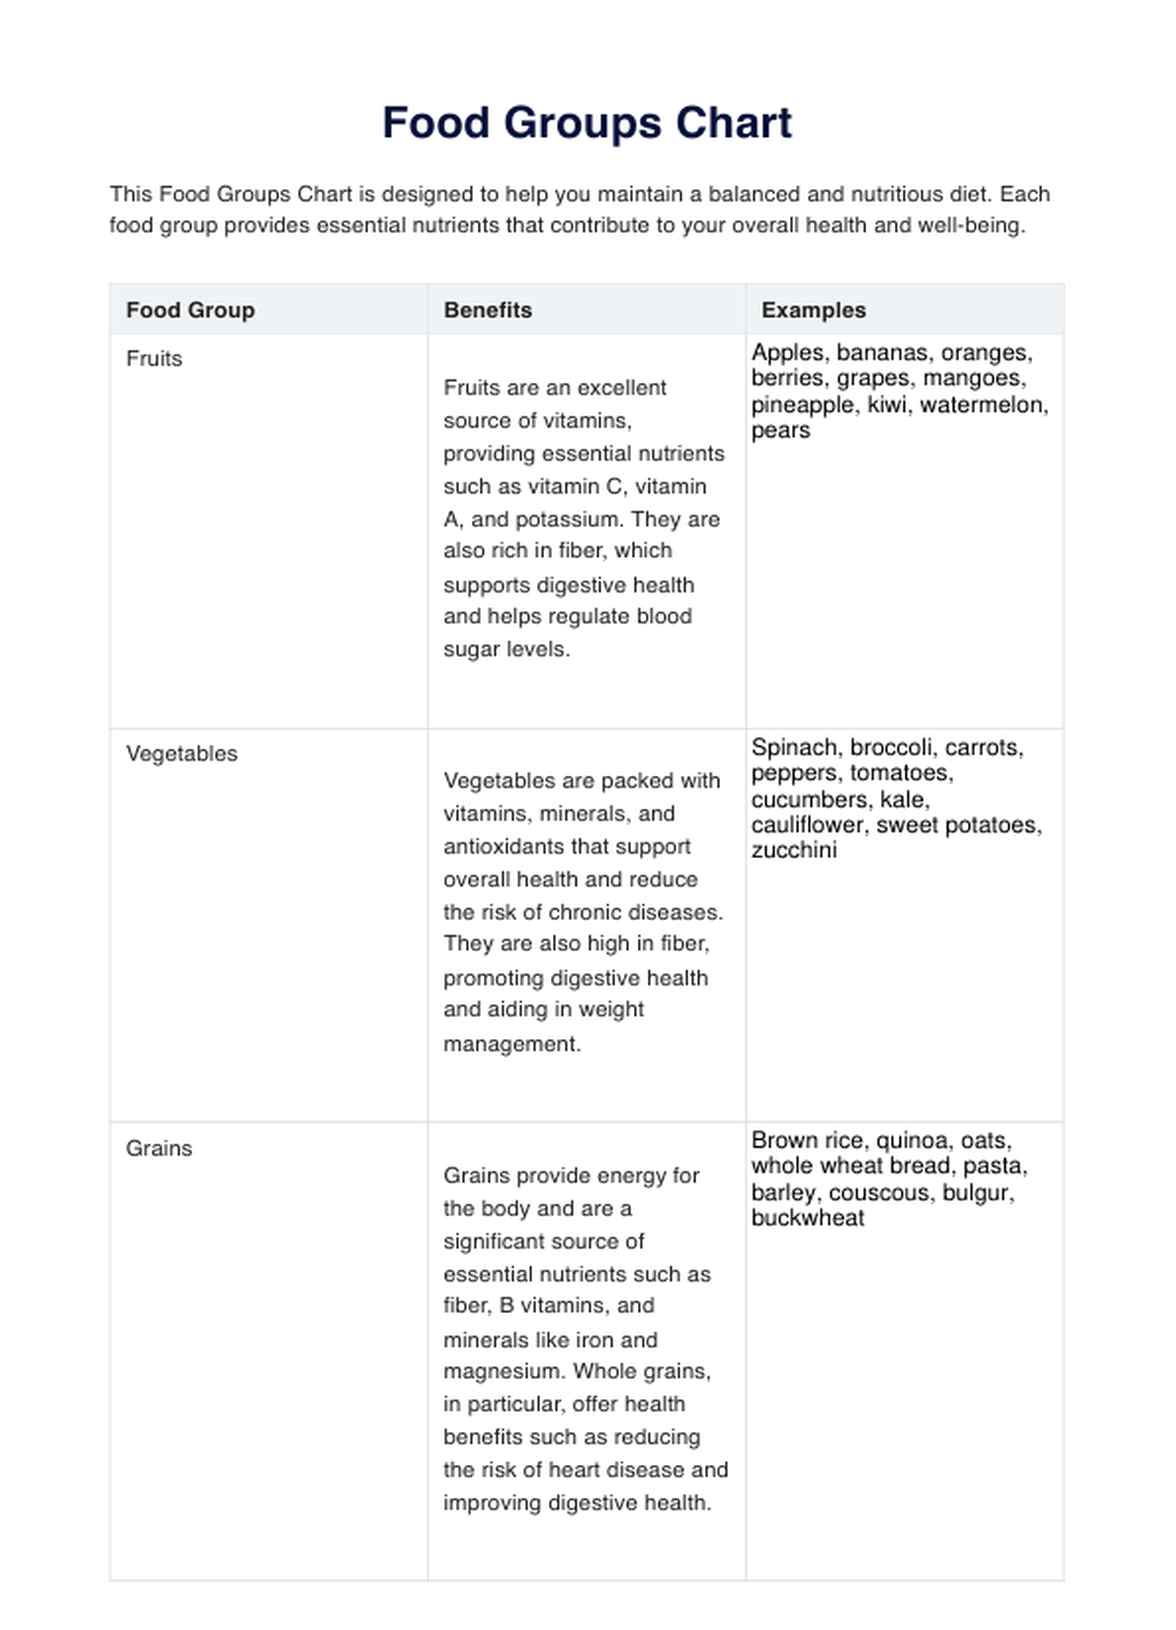  Food Groups Chart PDF Example